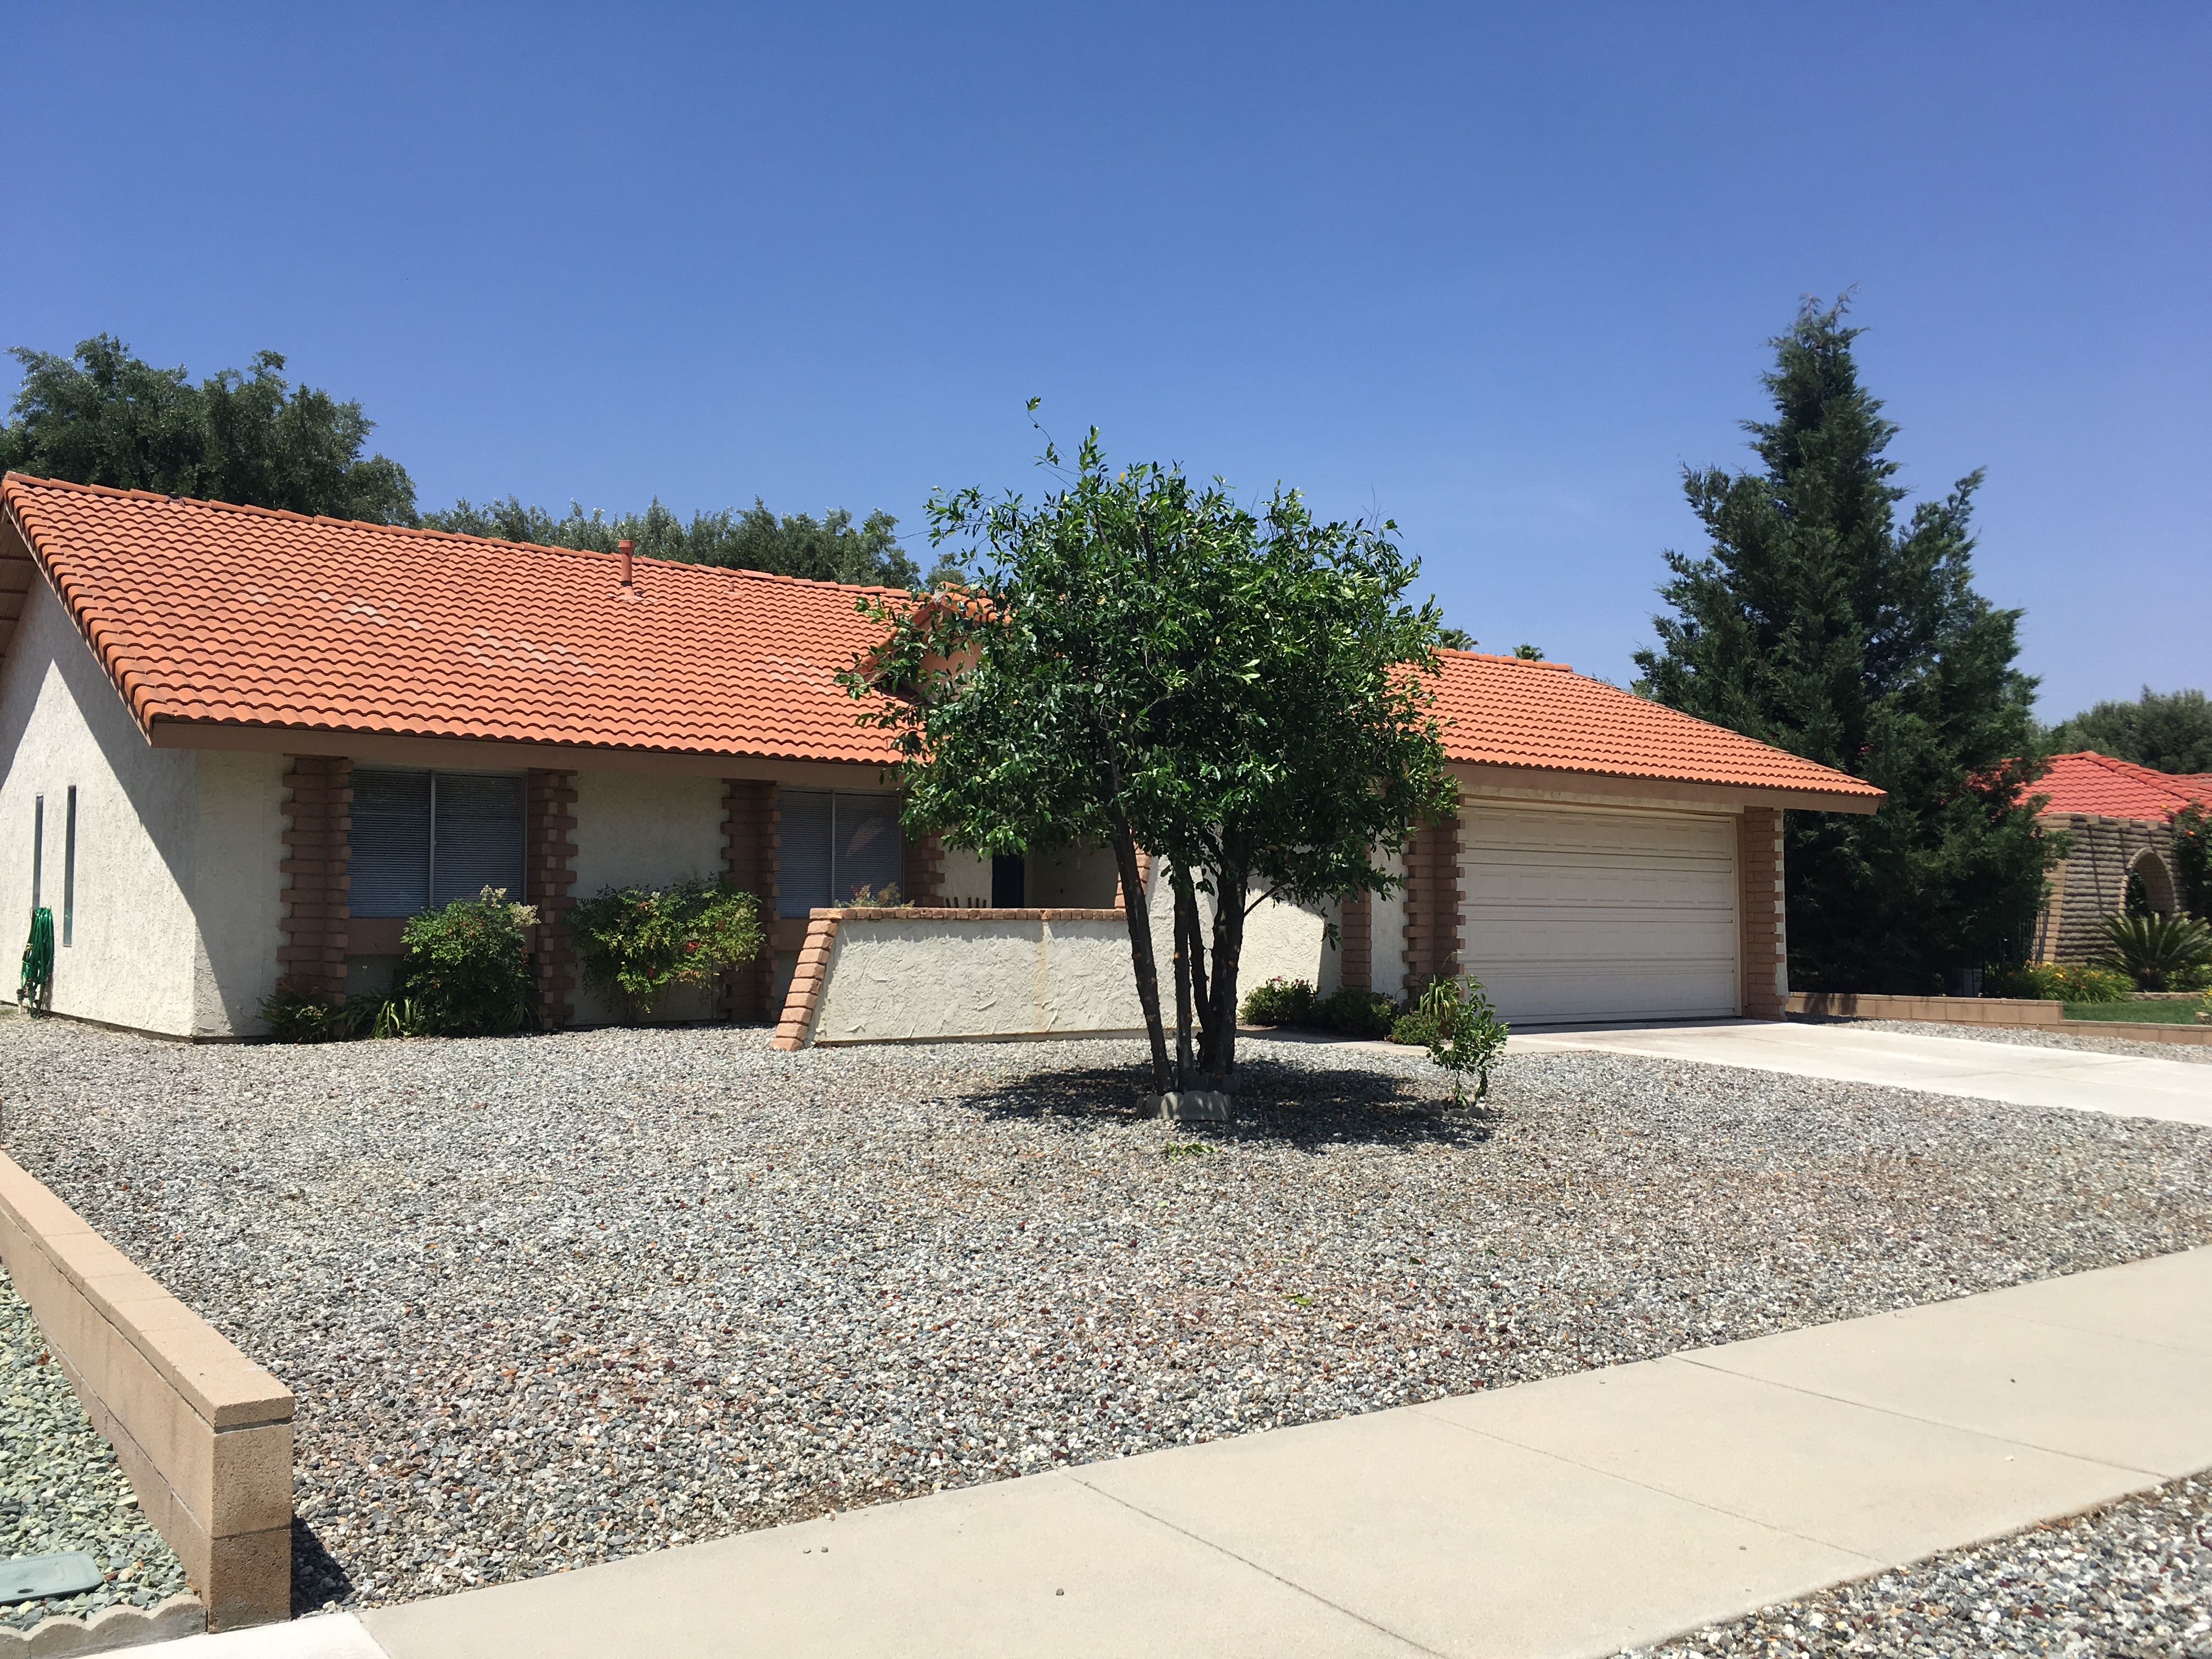 Just Listed and Sold in 21 days!  Seven Hills 55+ Gold Resort Community in Hemet, CA.  June 5th 2017.  Call Denise Gentile, Realtor at Coldwell Banker Associated Brokers Realty if you would like the same professional results!  951-751-1311.